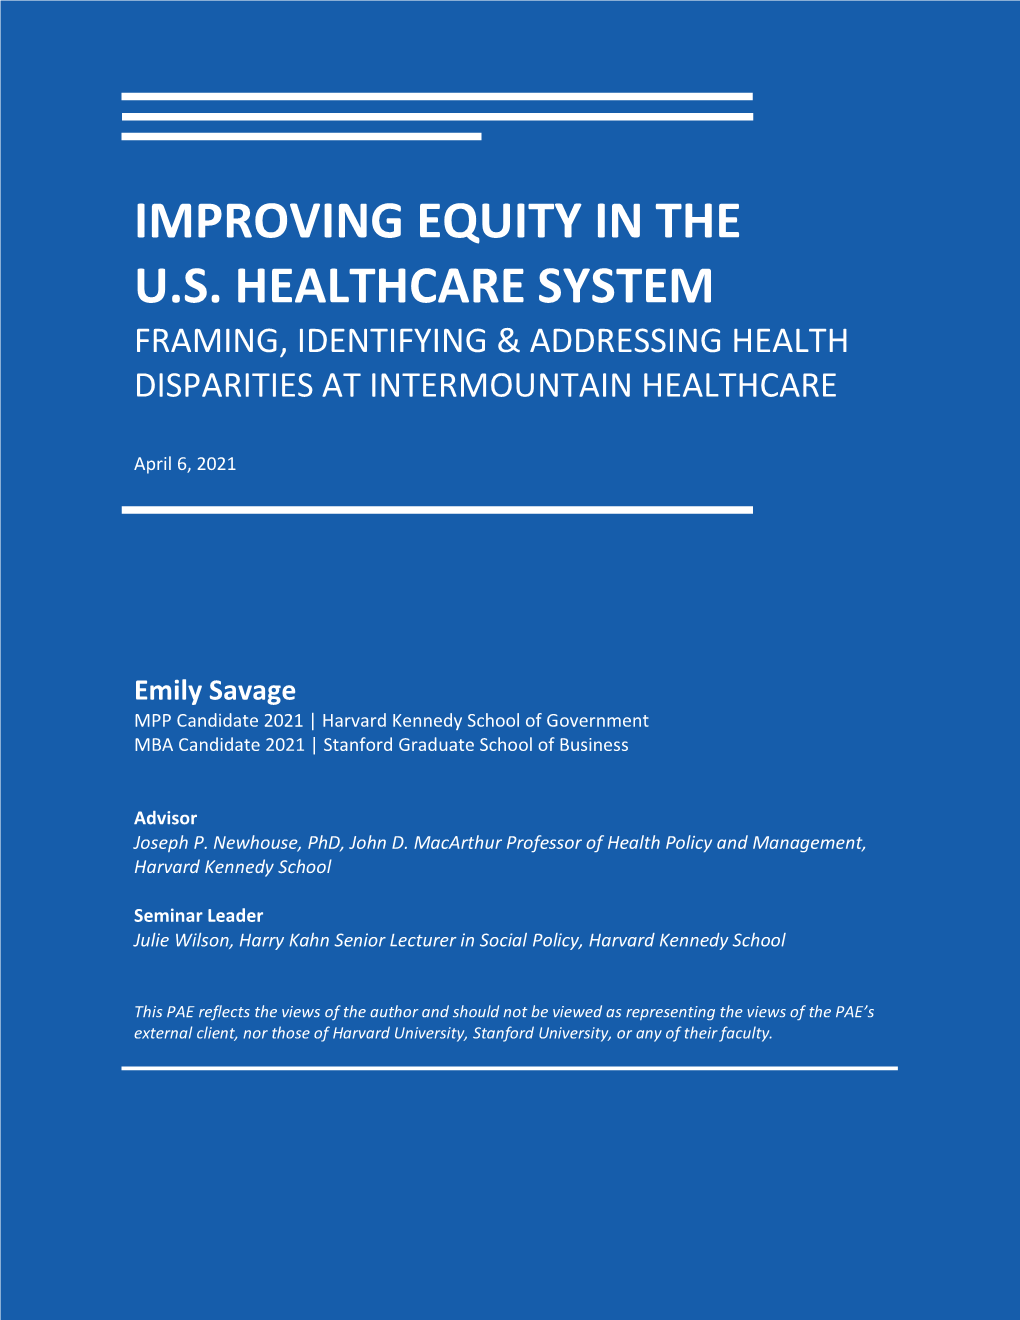 Improving Equity in the US Healthcare System: Framing, Identifying and Addressing Health Disparities at Intermountain Healthcare